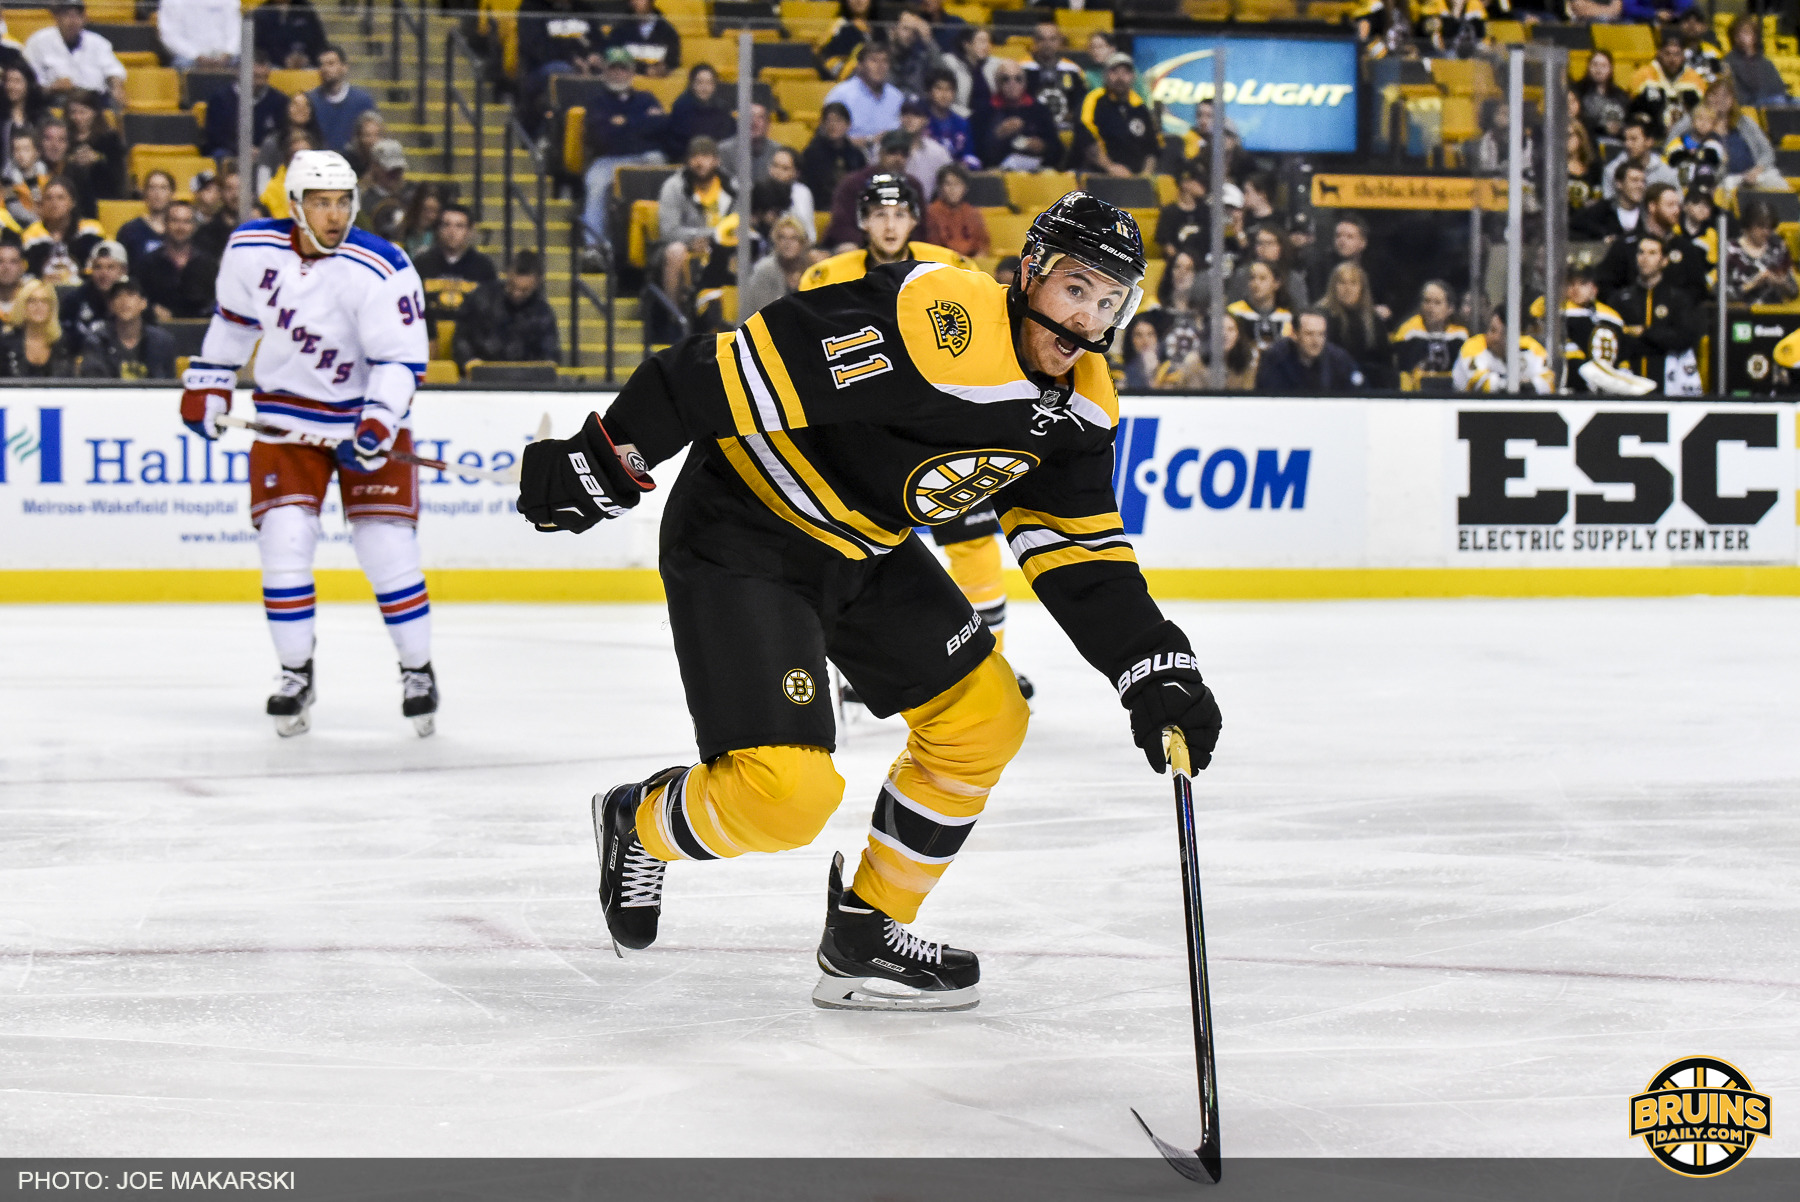 Jimmy Hayes looks to do good things with Ryan Spooner and Brett Connolly on the third line. Photo by Joe Makarski, Bruins Daily.